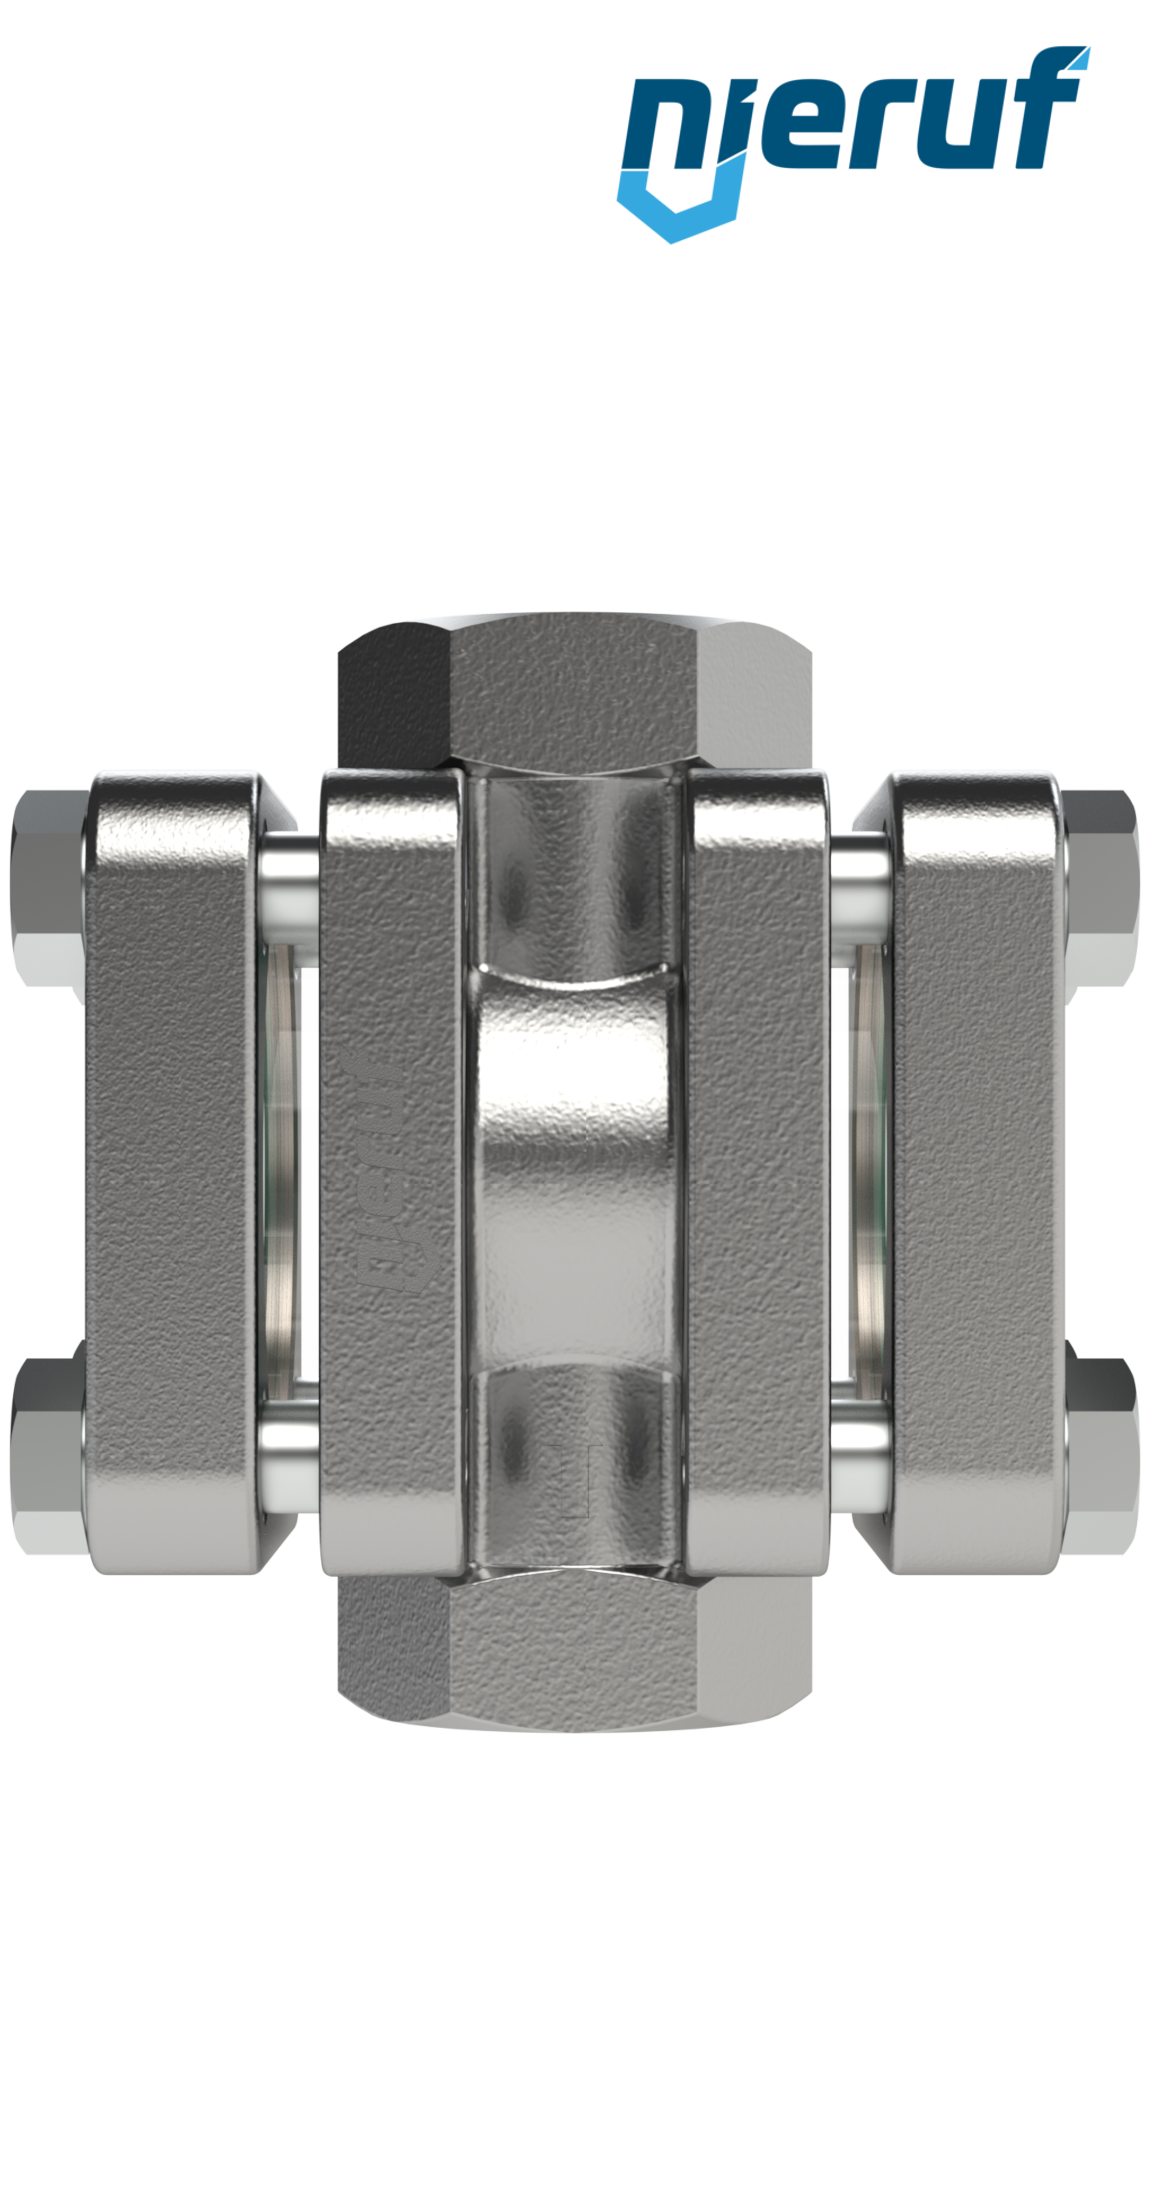 flow-through sight flow indicator DN15 - 1/2" Inch stainless steel soda lime glass